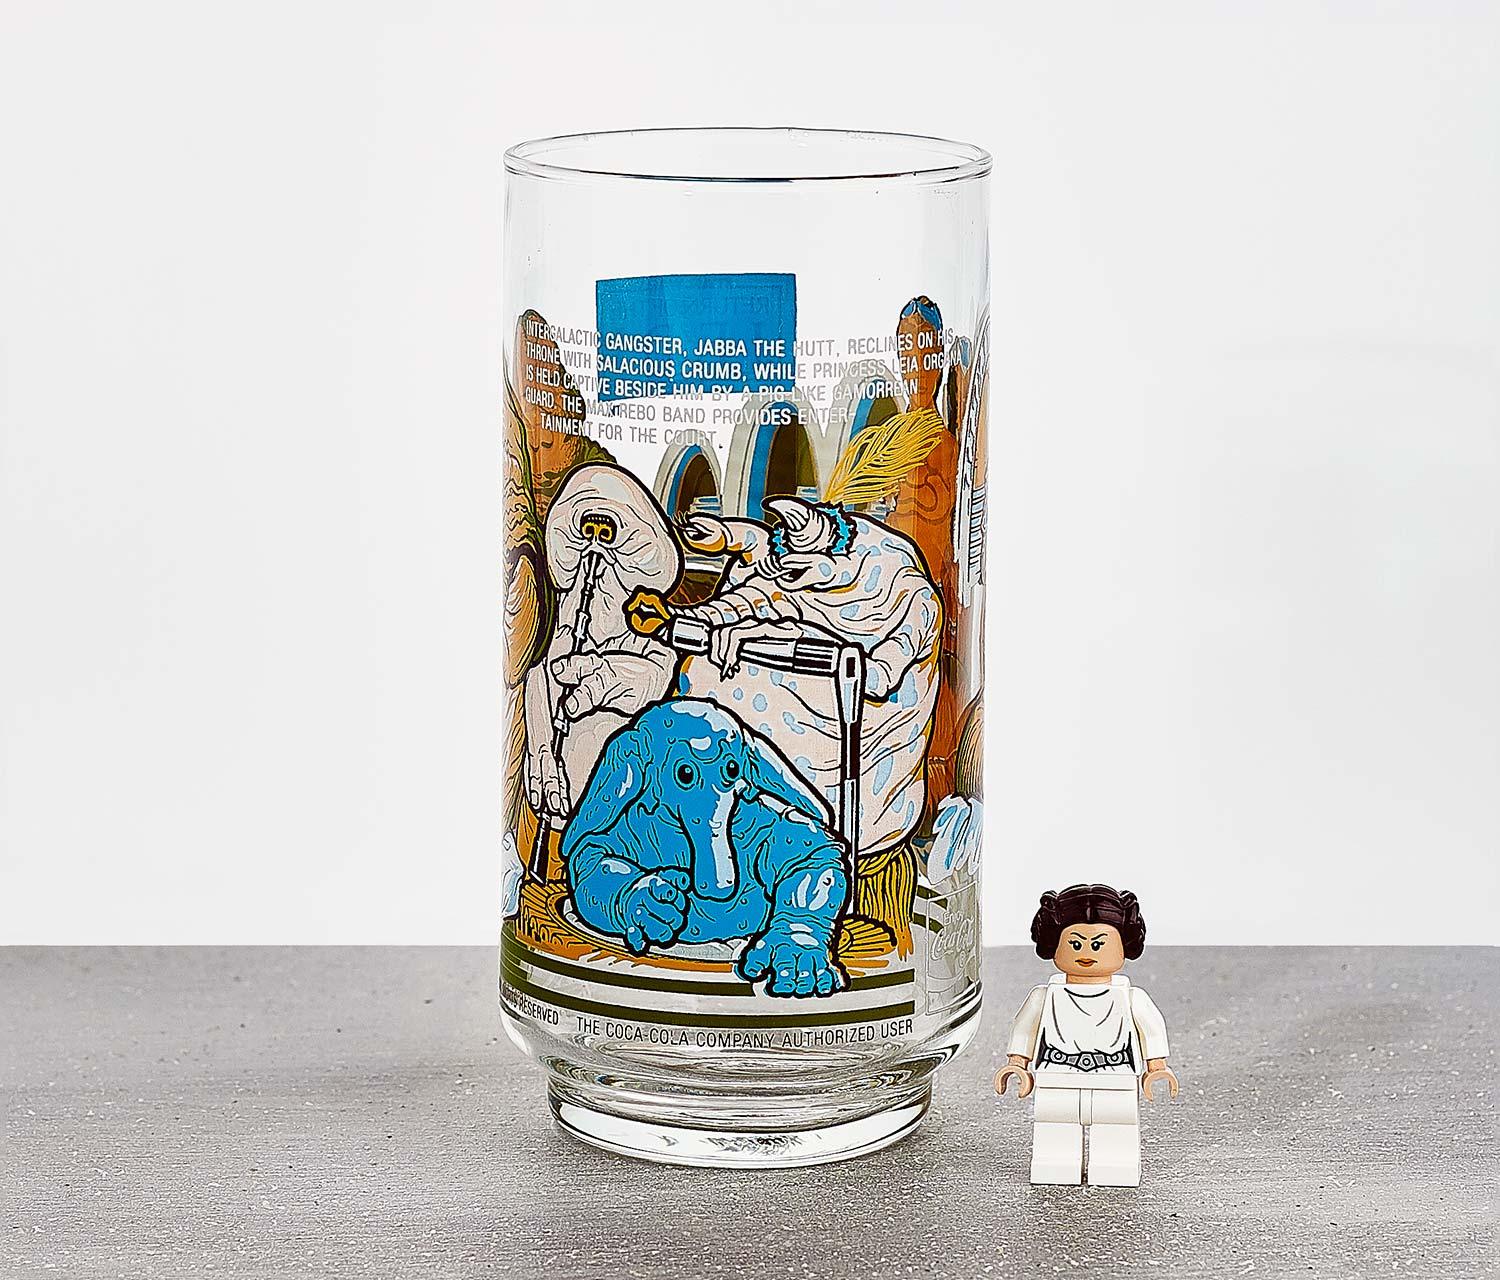 Lucasfilm Star Wars Shot glasses Leia, Hans Solo and Darth Vader 2011